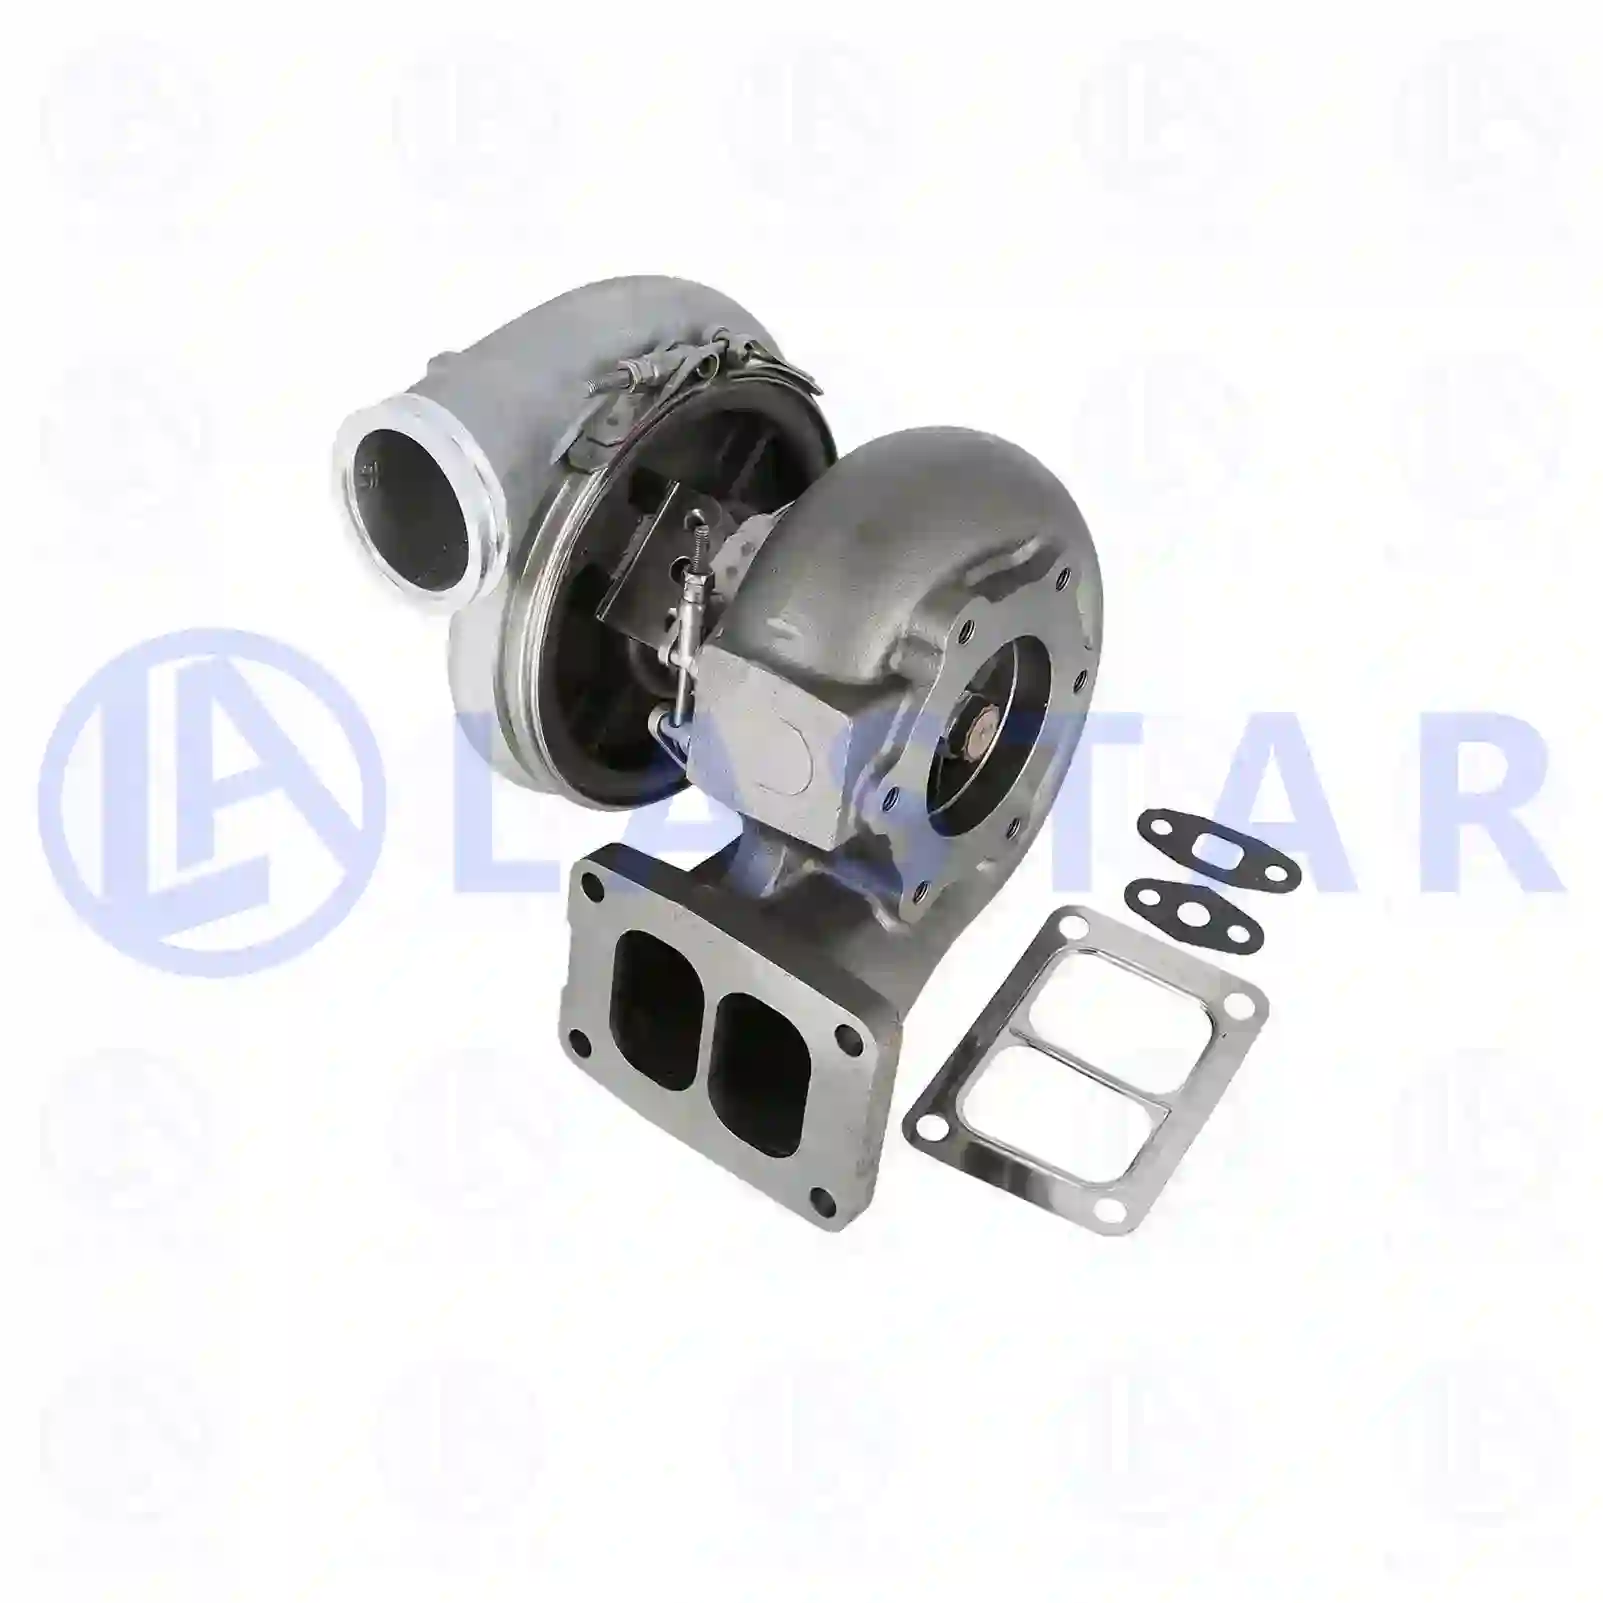 Turbocharger, with gasket kit, 77704558, 51091007274, 51091007292, 51091007301, 51091009274, 51091009292, 51091009301 ||  77704558 Lastar Spare Part | Truck Spare Parts, Auotomotive Spare Parts Turbocharger, with gasket kit, 77704558, 51091007274, 51091007292, 51091007301, 51091009274, 51091009292, 51091009301 ||  77704558 Lastar Spare Part | Truck Spare Parts, Auotomotive Spare Parts